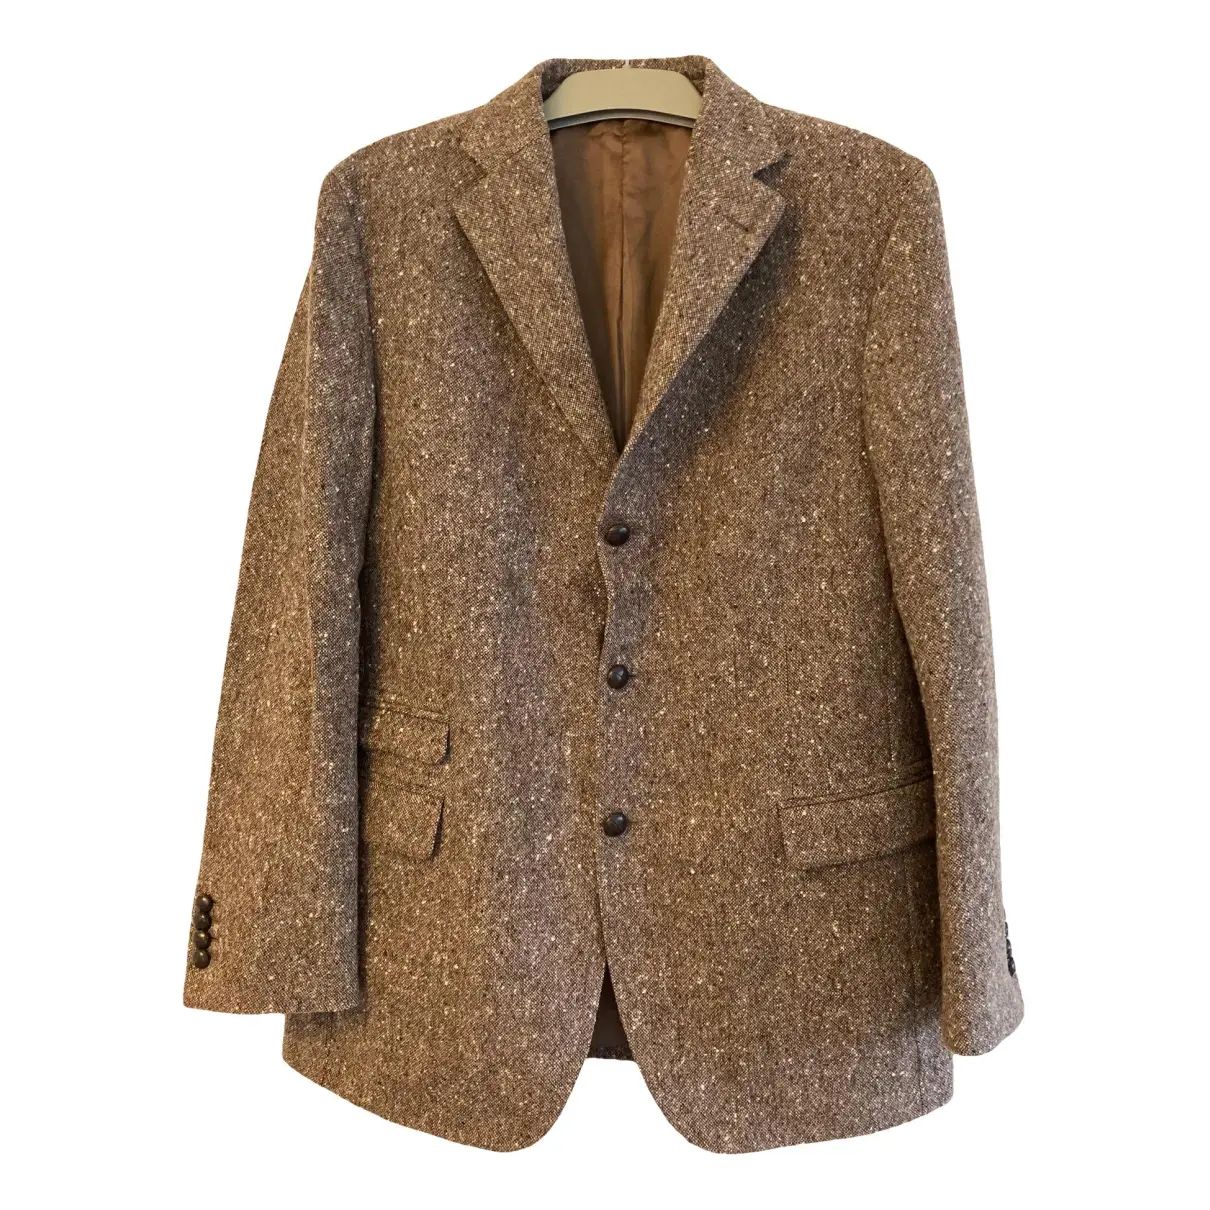 Massimo DuttiWool jacket46 UK -USVery good conditionBrown, Wool$69.83$59.43Use code COLLECTIVE15 ... | Vestiaire Collective (Global)